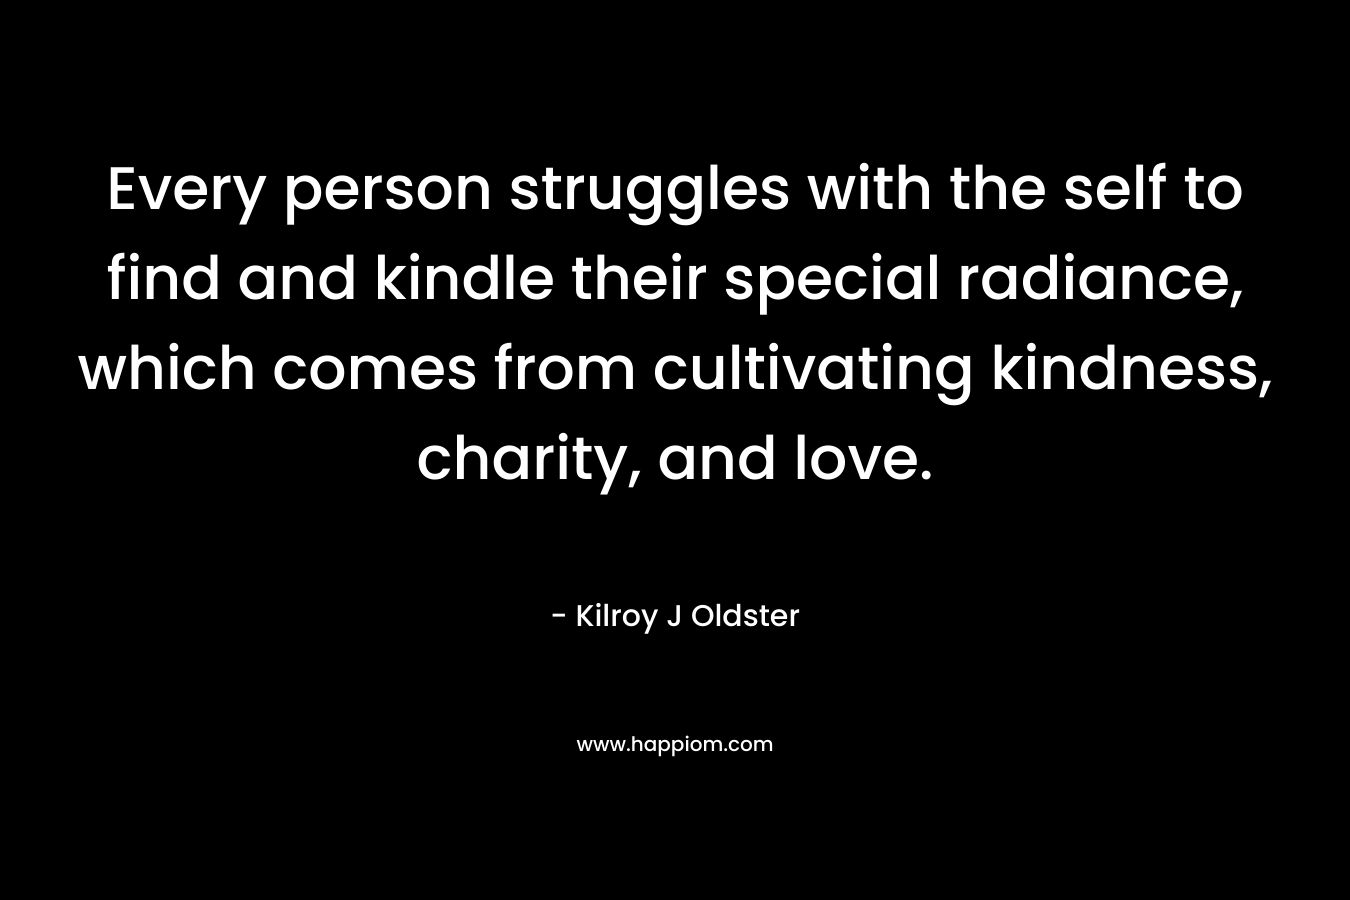 Every person struggles with the self to find and kindle their special radiance, which comes from cultivating kindness, charity, and love. – Kilroy J Oldster